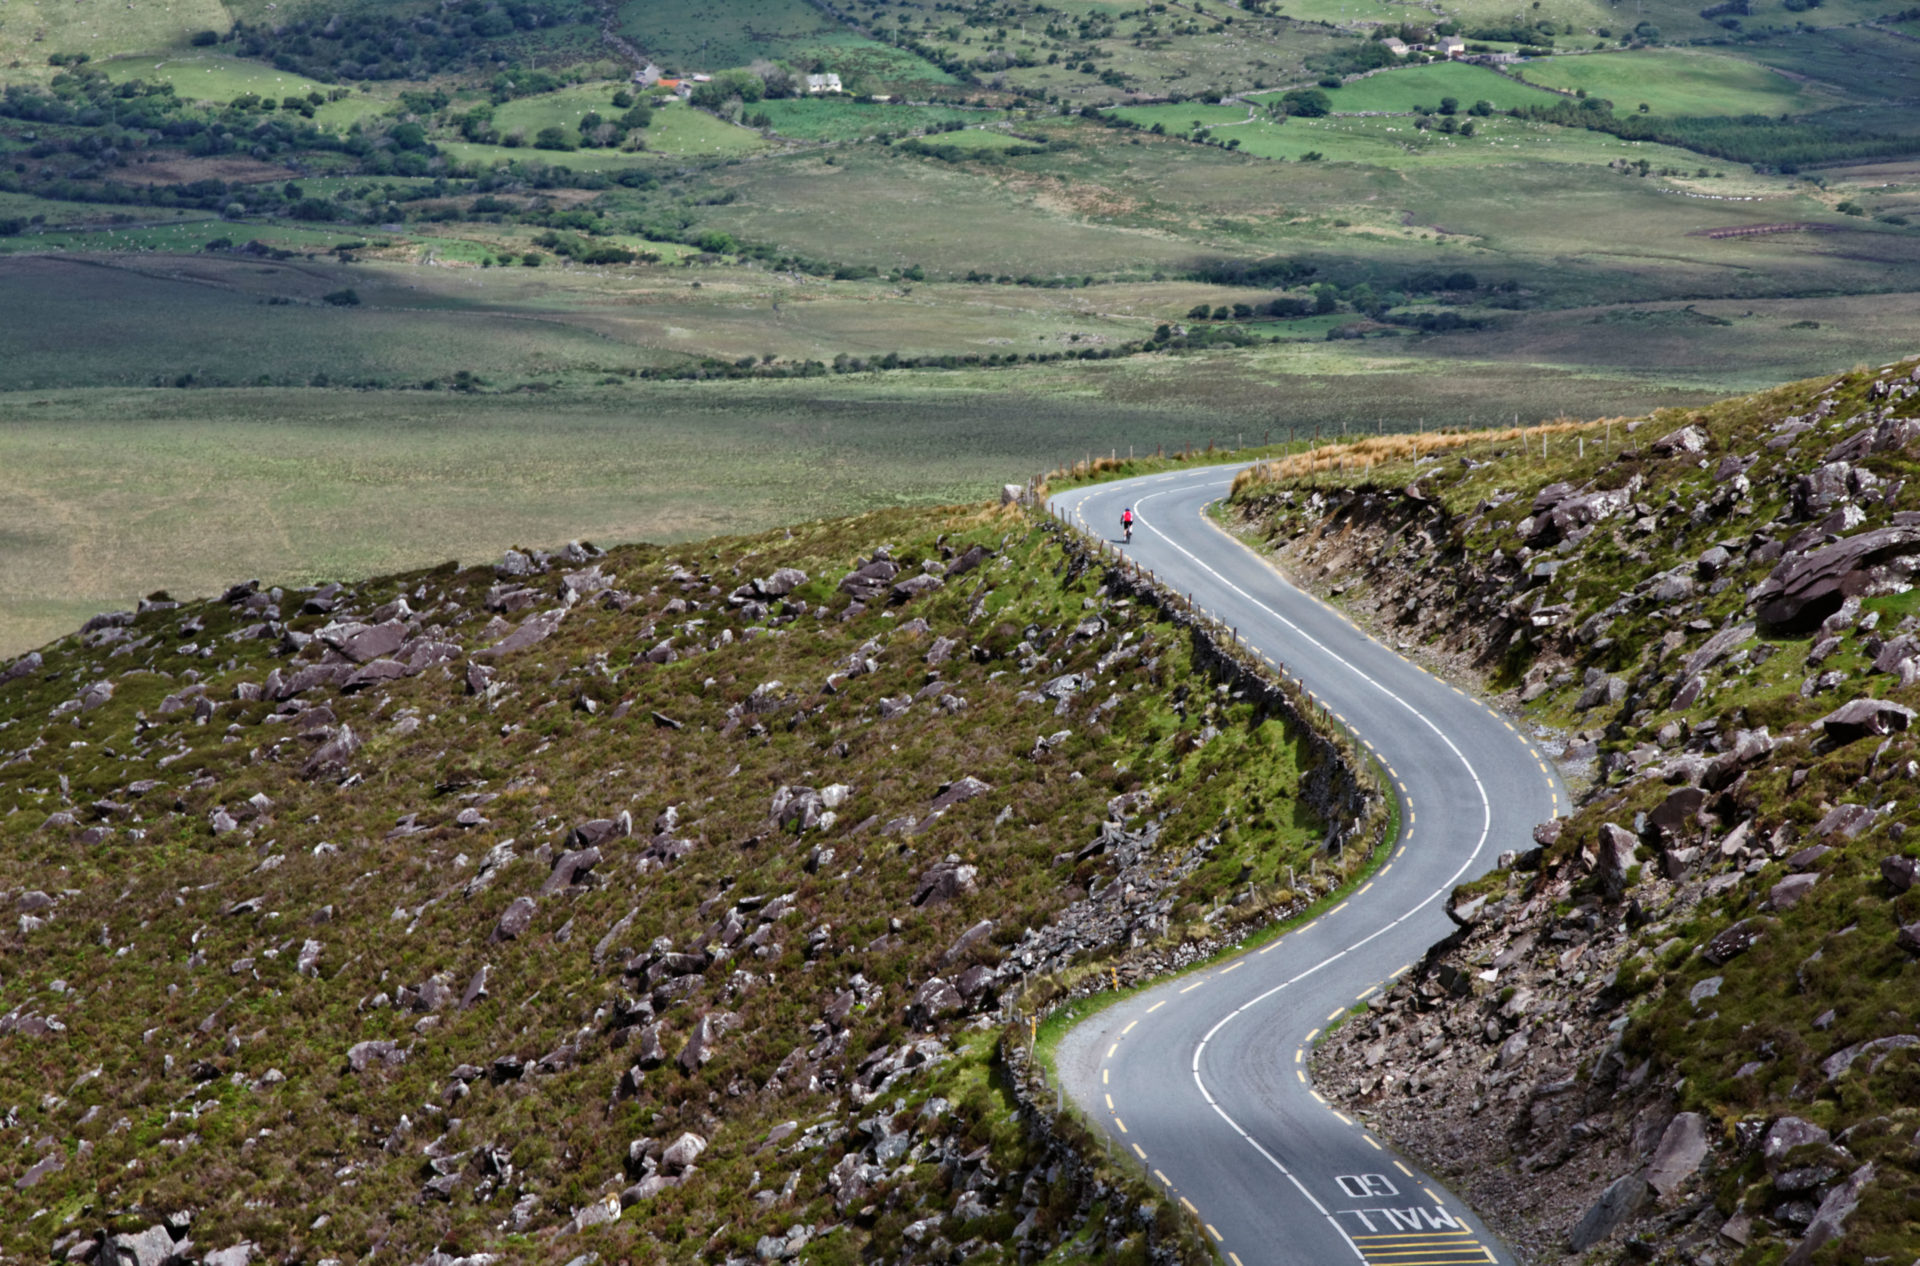 The Conor Pass in County Kerry, Ireland